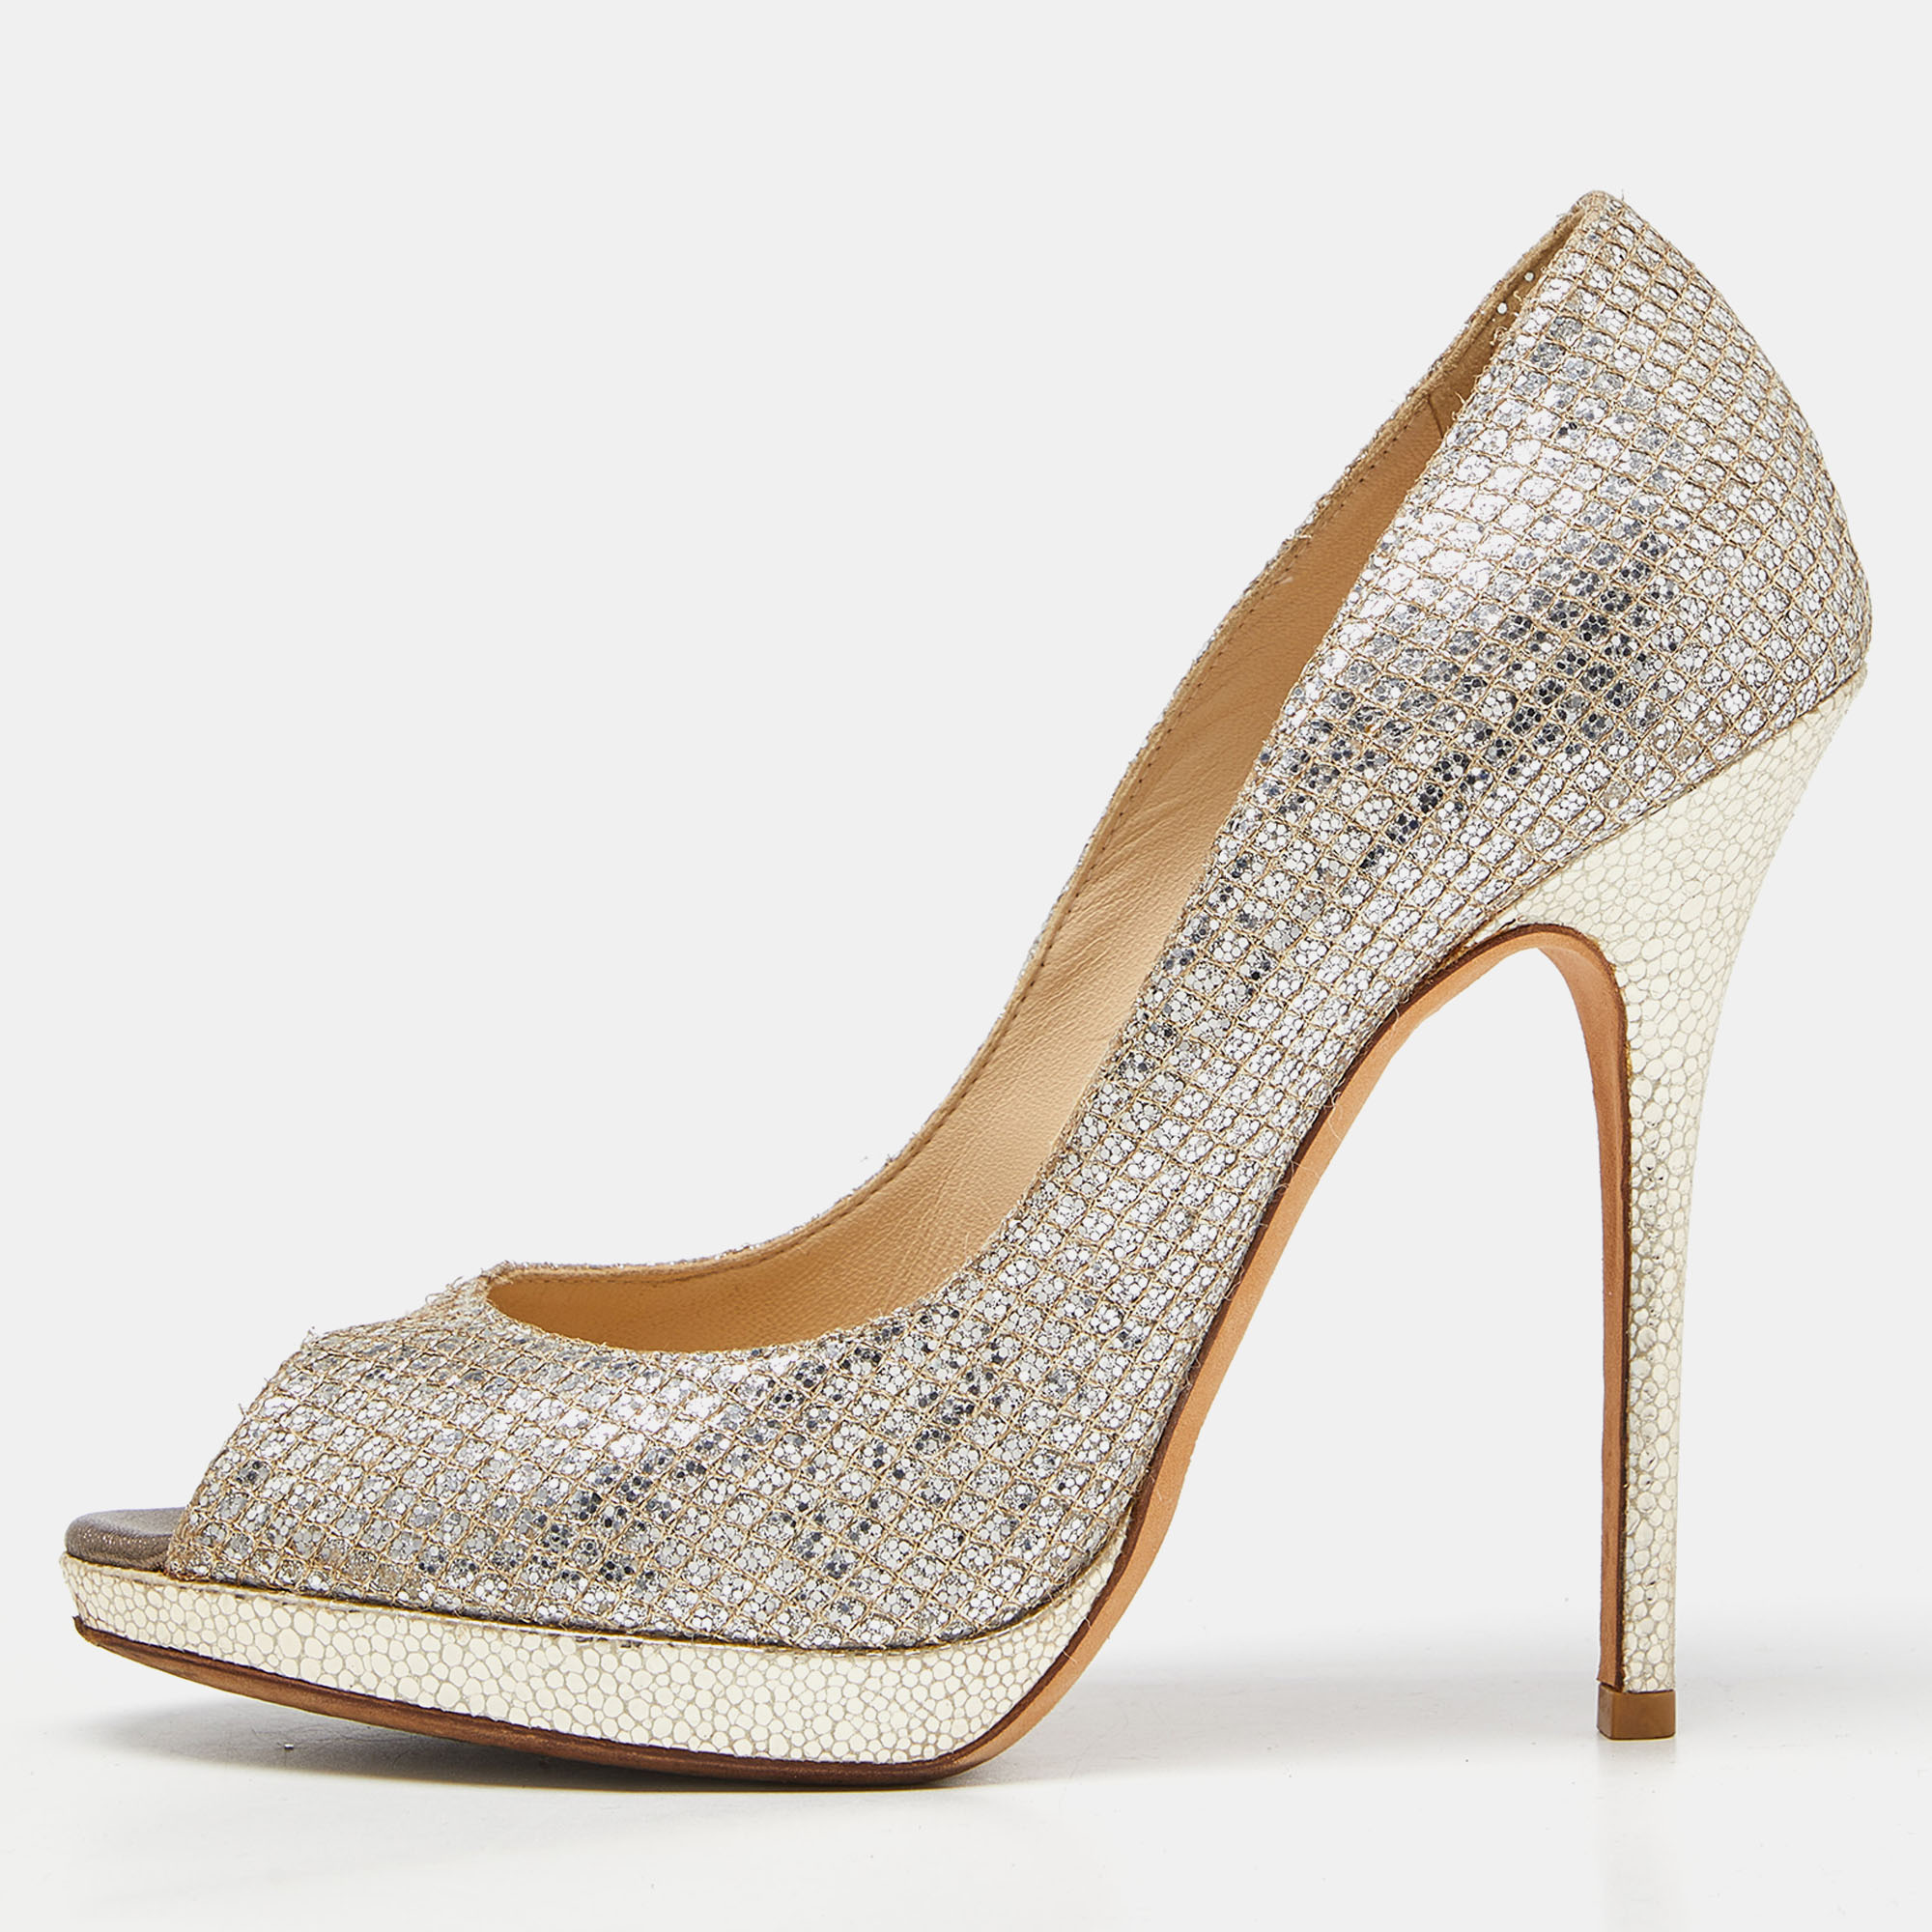 Jimmy choo gold/silver glitter and leather luna peep toe pumps size 38.5